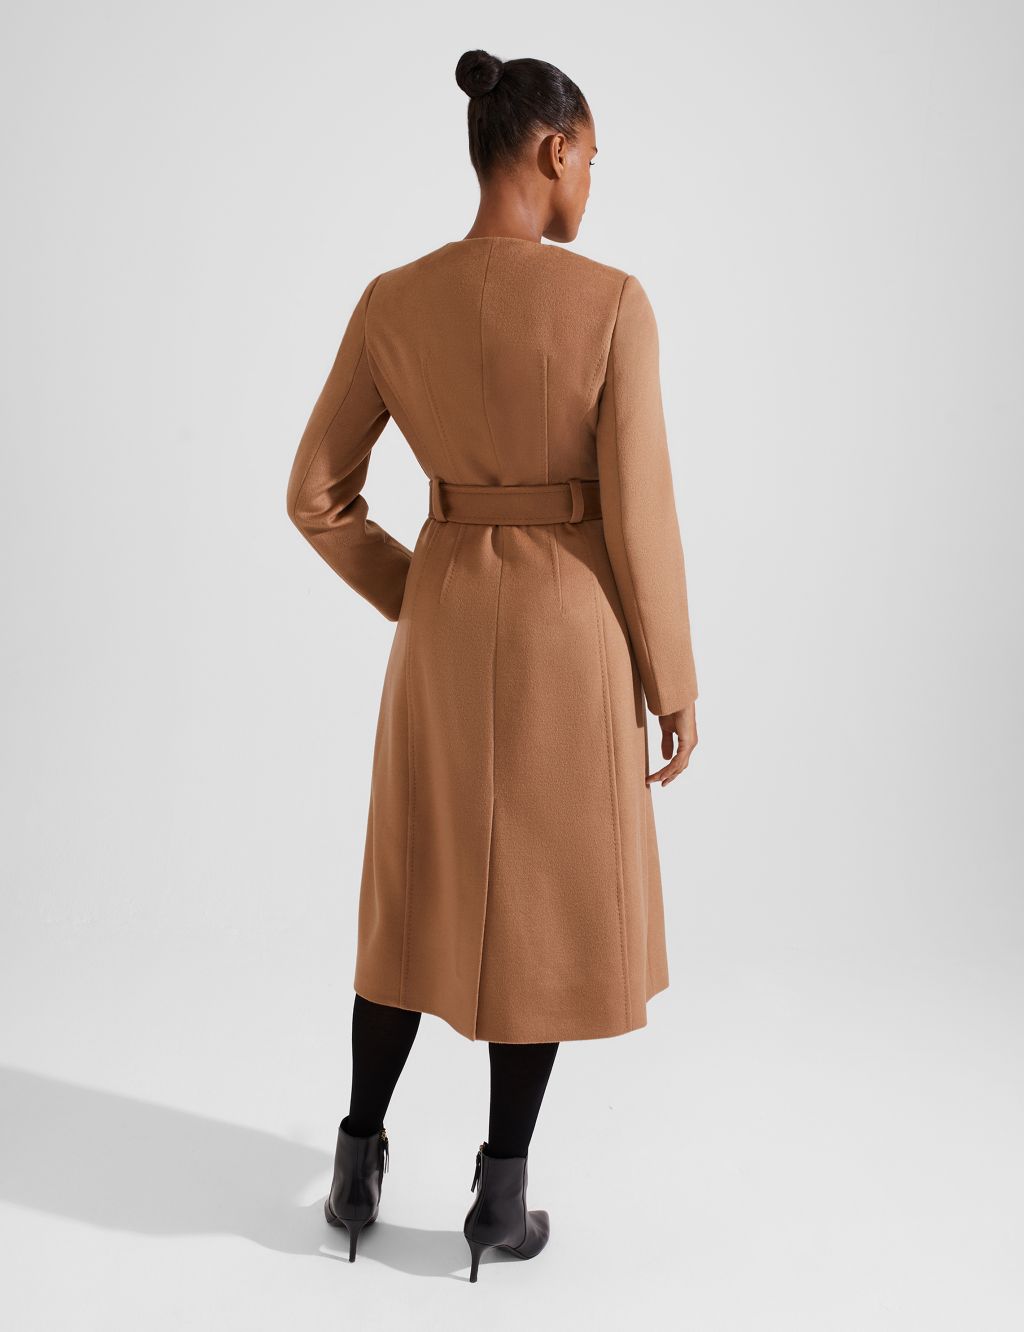 Pure Wool Belted Collarless Tailored Coat image 5